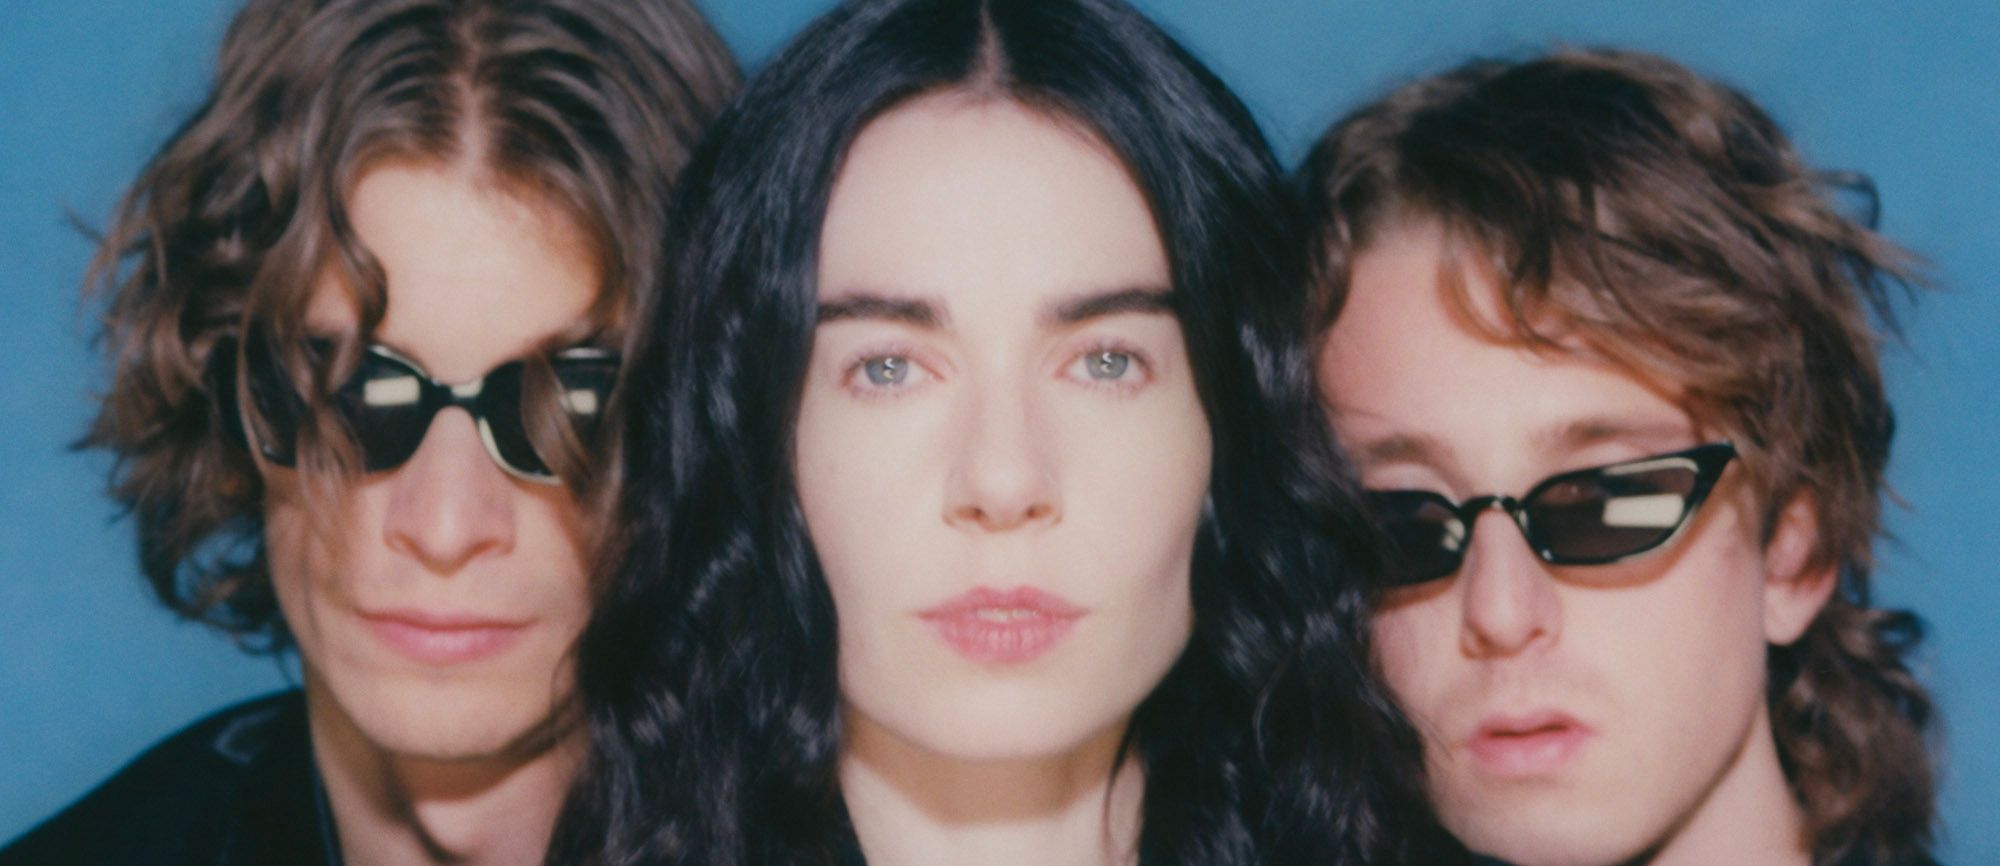 https://blog.roughtrade.com/content/images/2022/02/SineadObrien-OnTheRise-RoughTrade-1.jpg